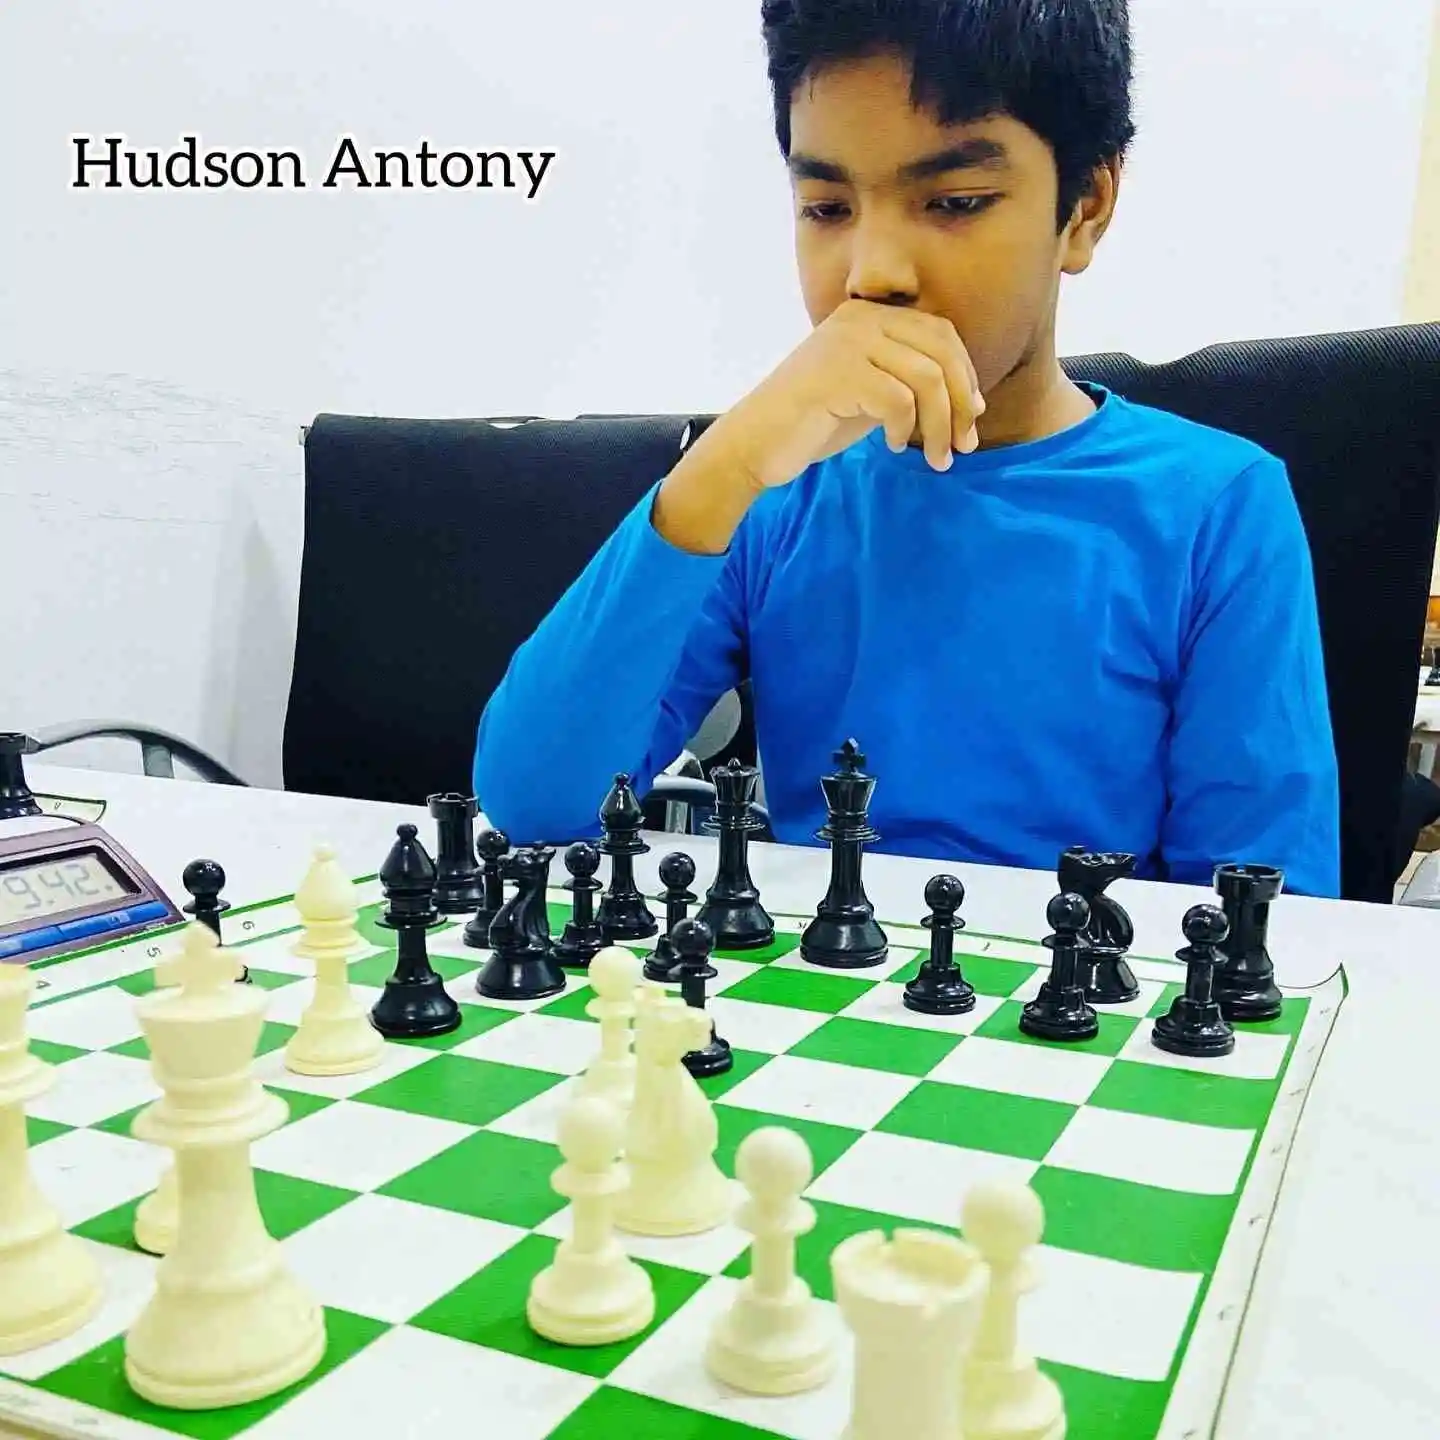 Students Achievements (Before May 2023) - Academy Student Hudson Antony Achieve Fide Rating